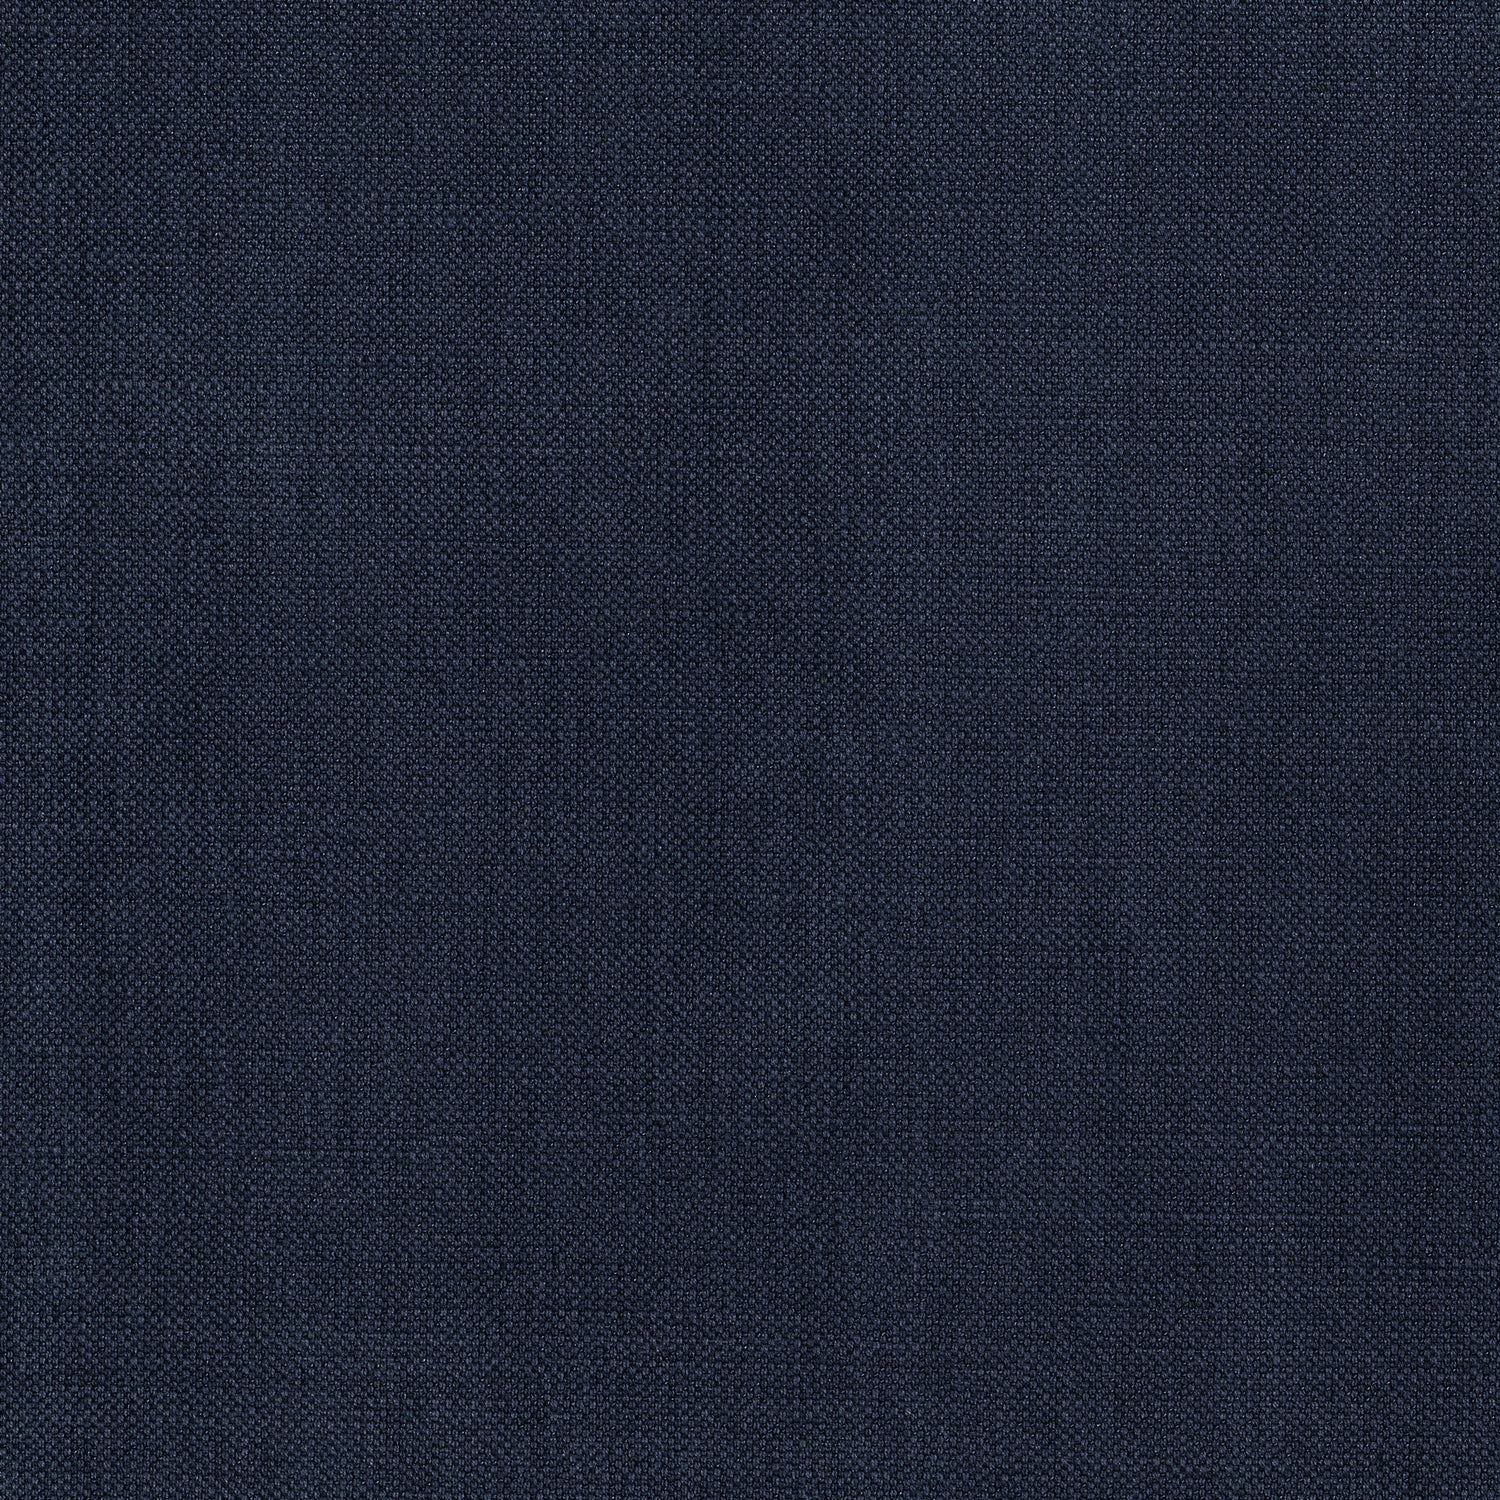 Prisma fabric in indigo color - pattern number W70156 - by Thibaut in the Woven Resource Vol 12 Prisma Fabrics collection